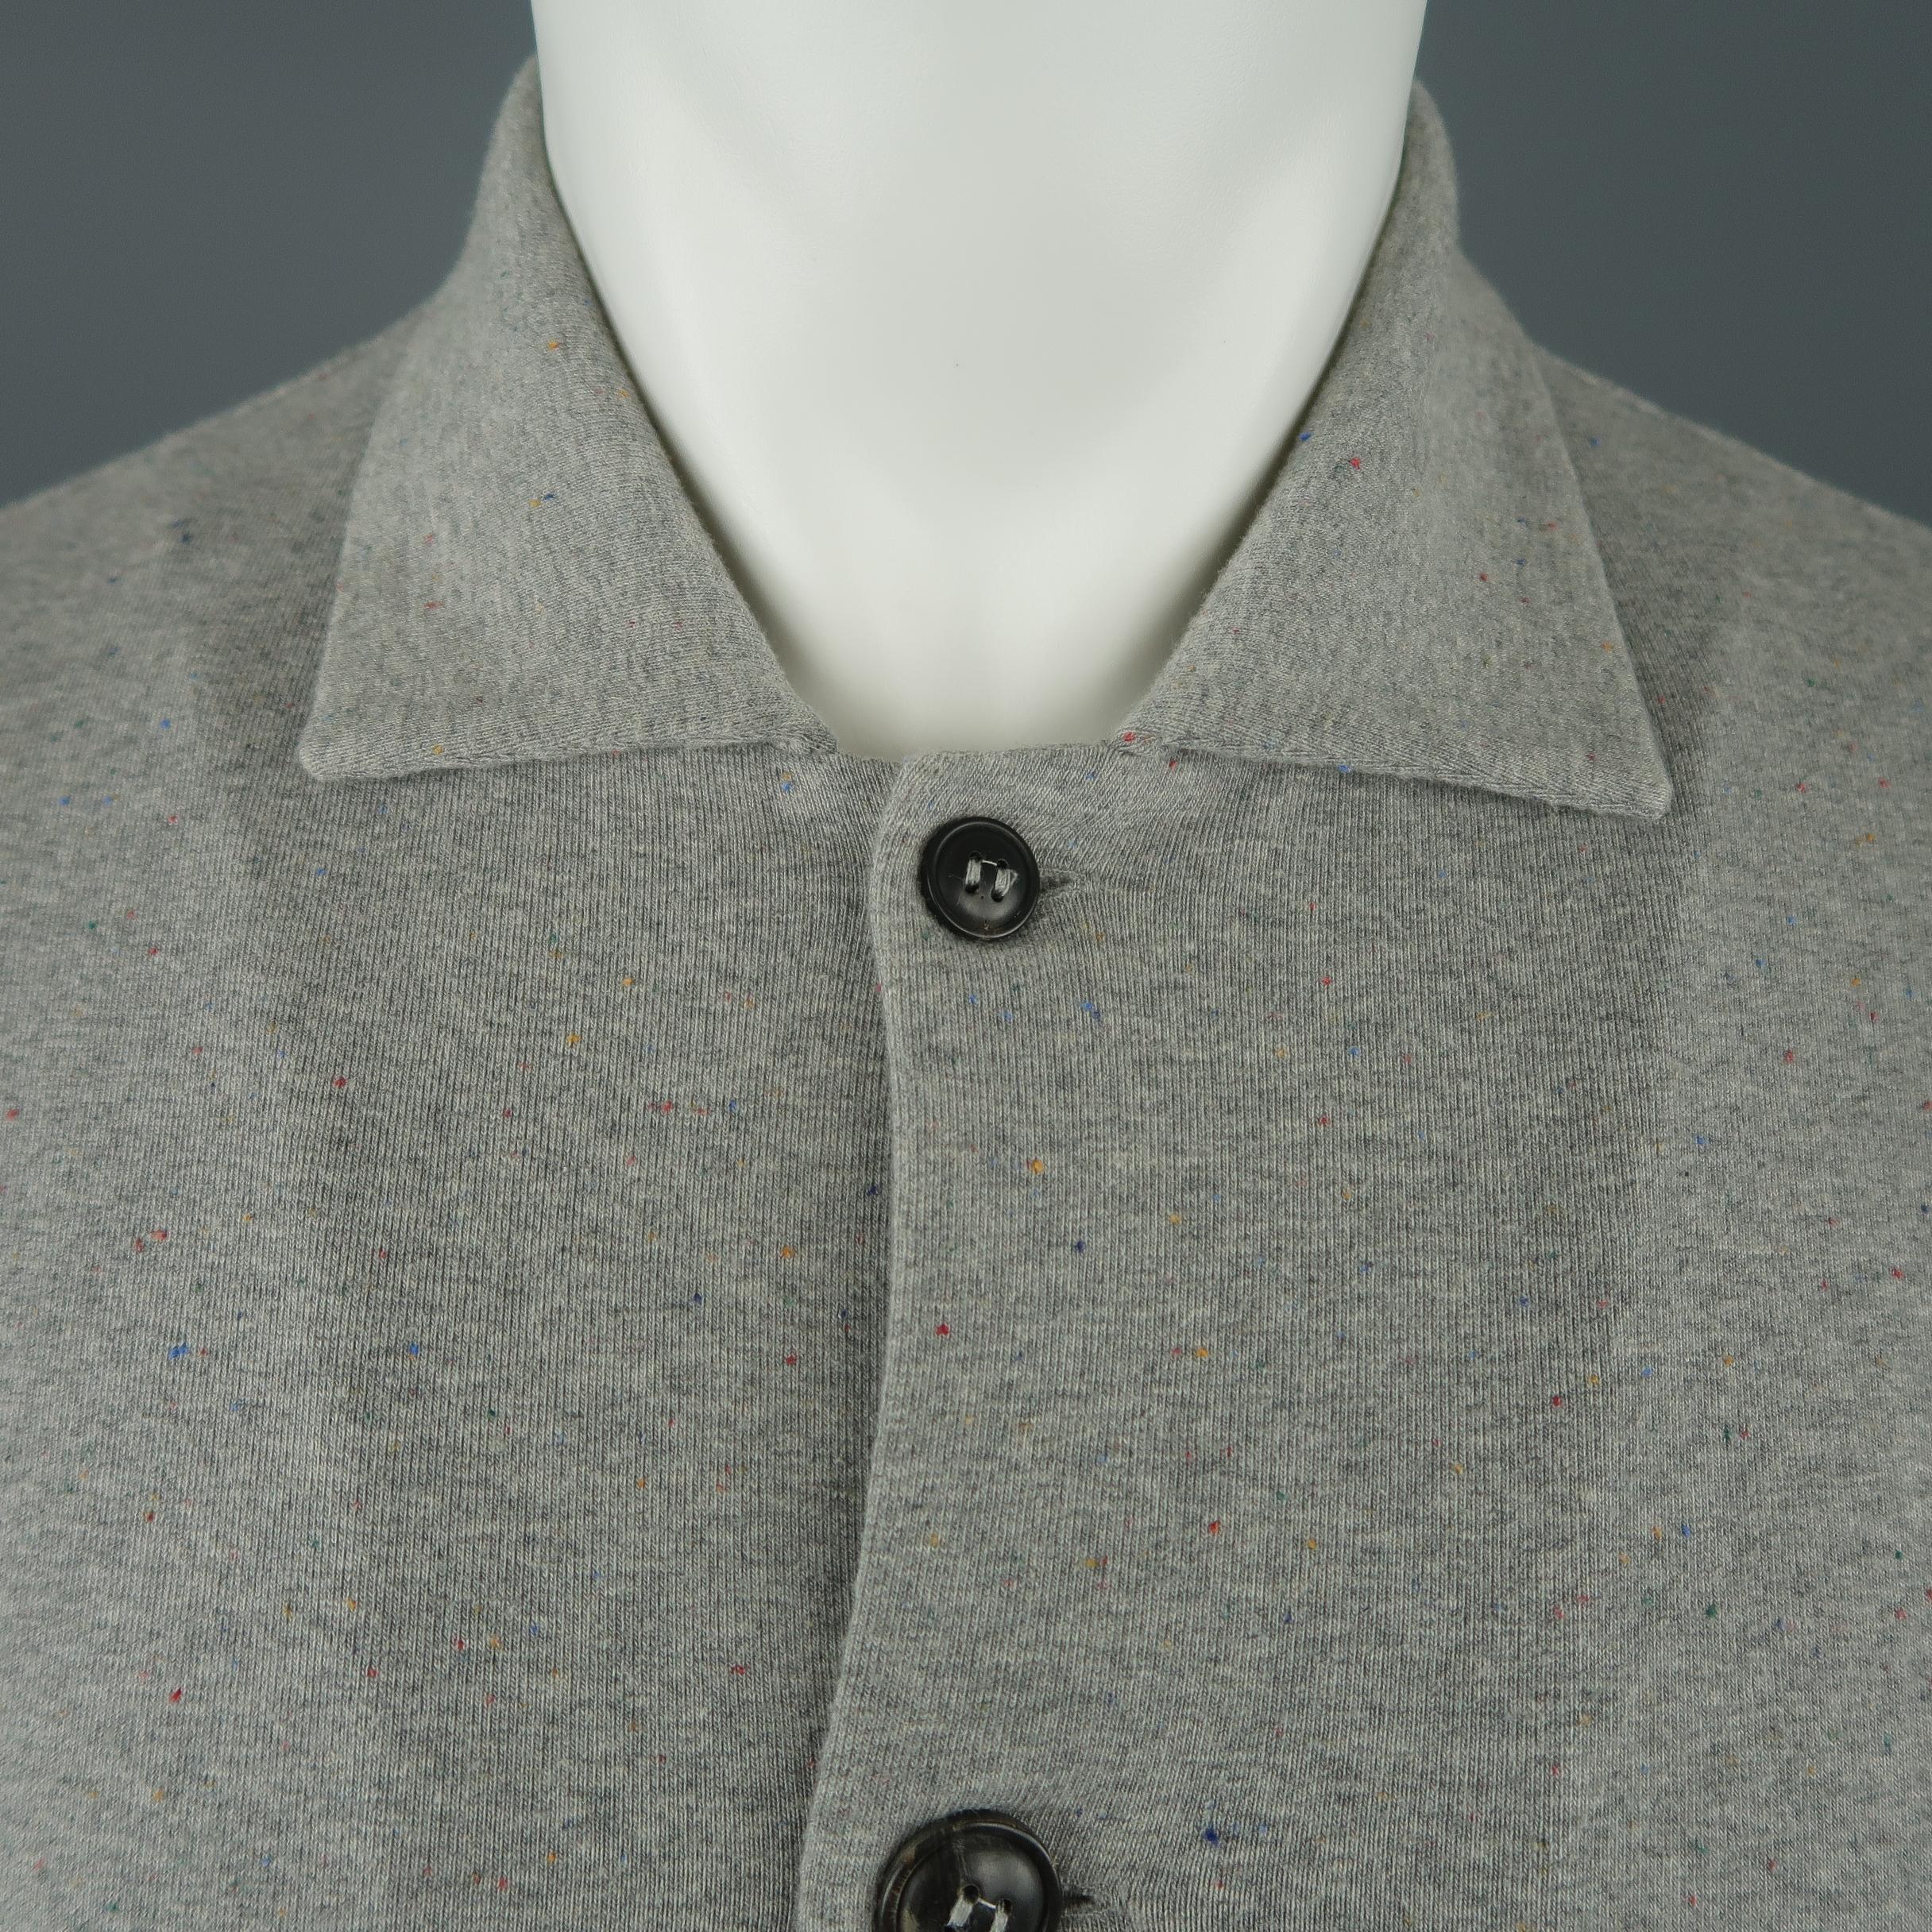 HOMECORE jacket comes in a light weight heather gray jersey knit with multi-color speckled pattern throughout featuring a pointed collar, slanted slit pockets, and button up front. Made in Portugal.
 
Excellent Pre-Owned Condition.
Marked: S
